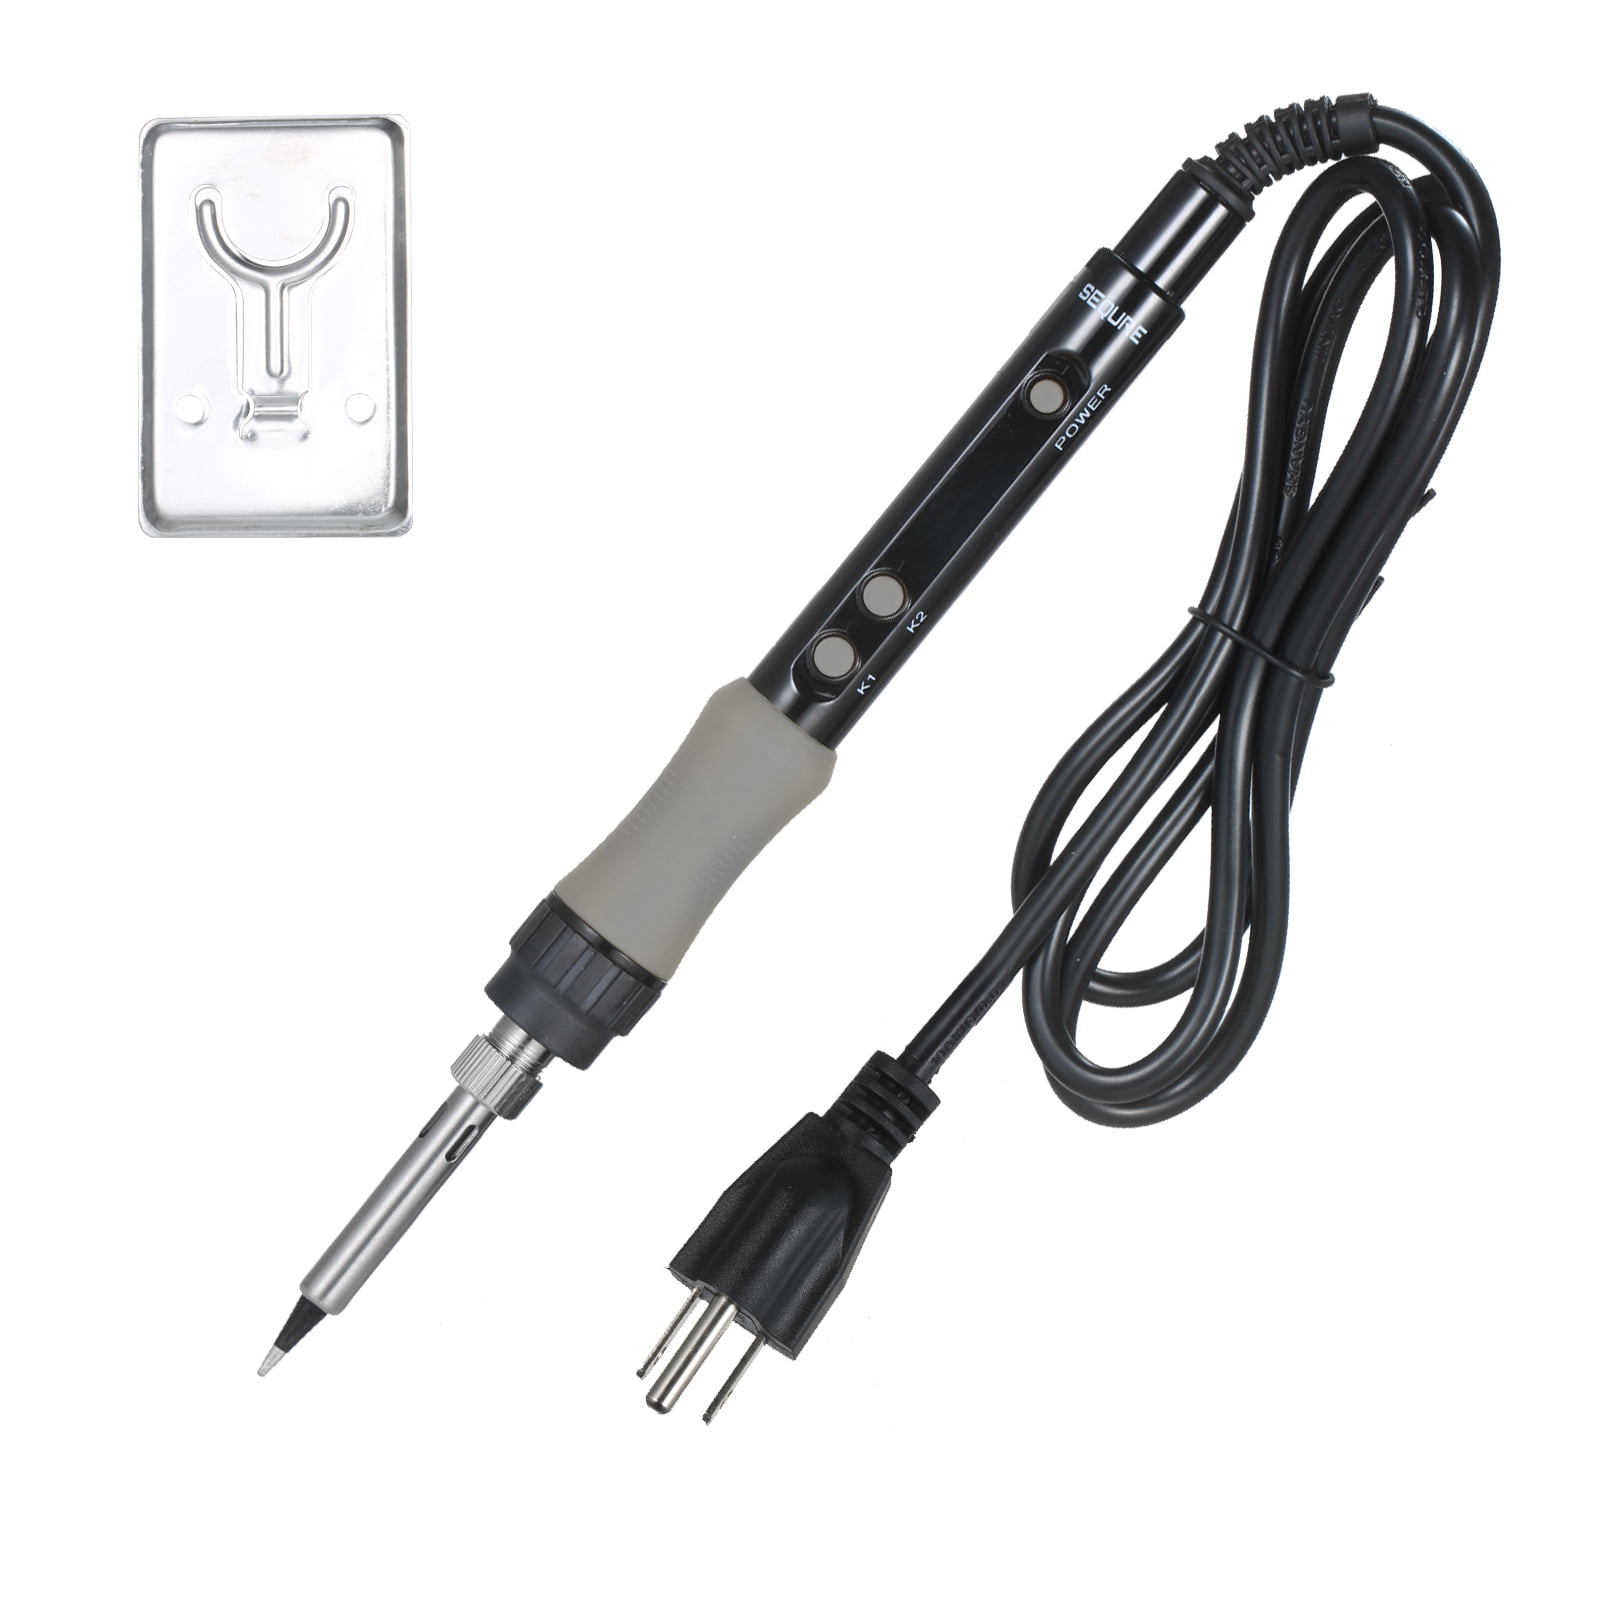 Details about   Electric Soldering Iron Mini Portable LED Digital Adjustable Temperature Tools